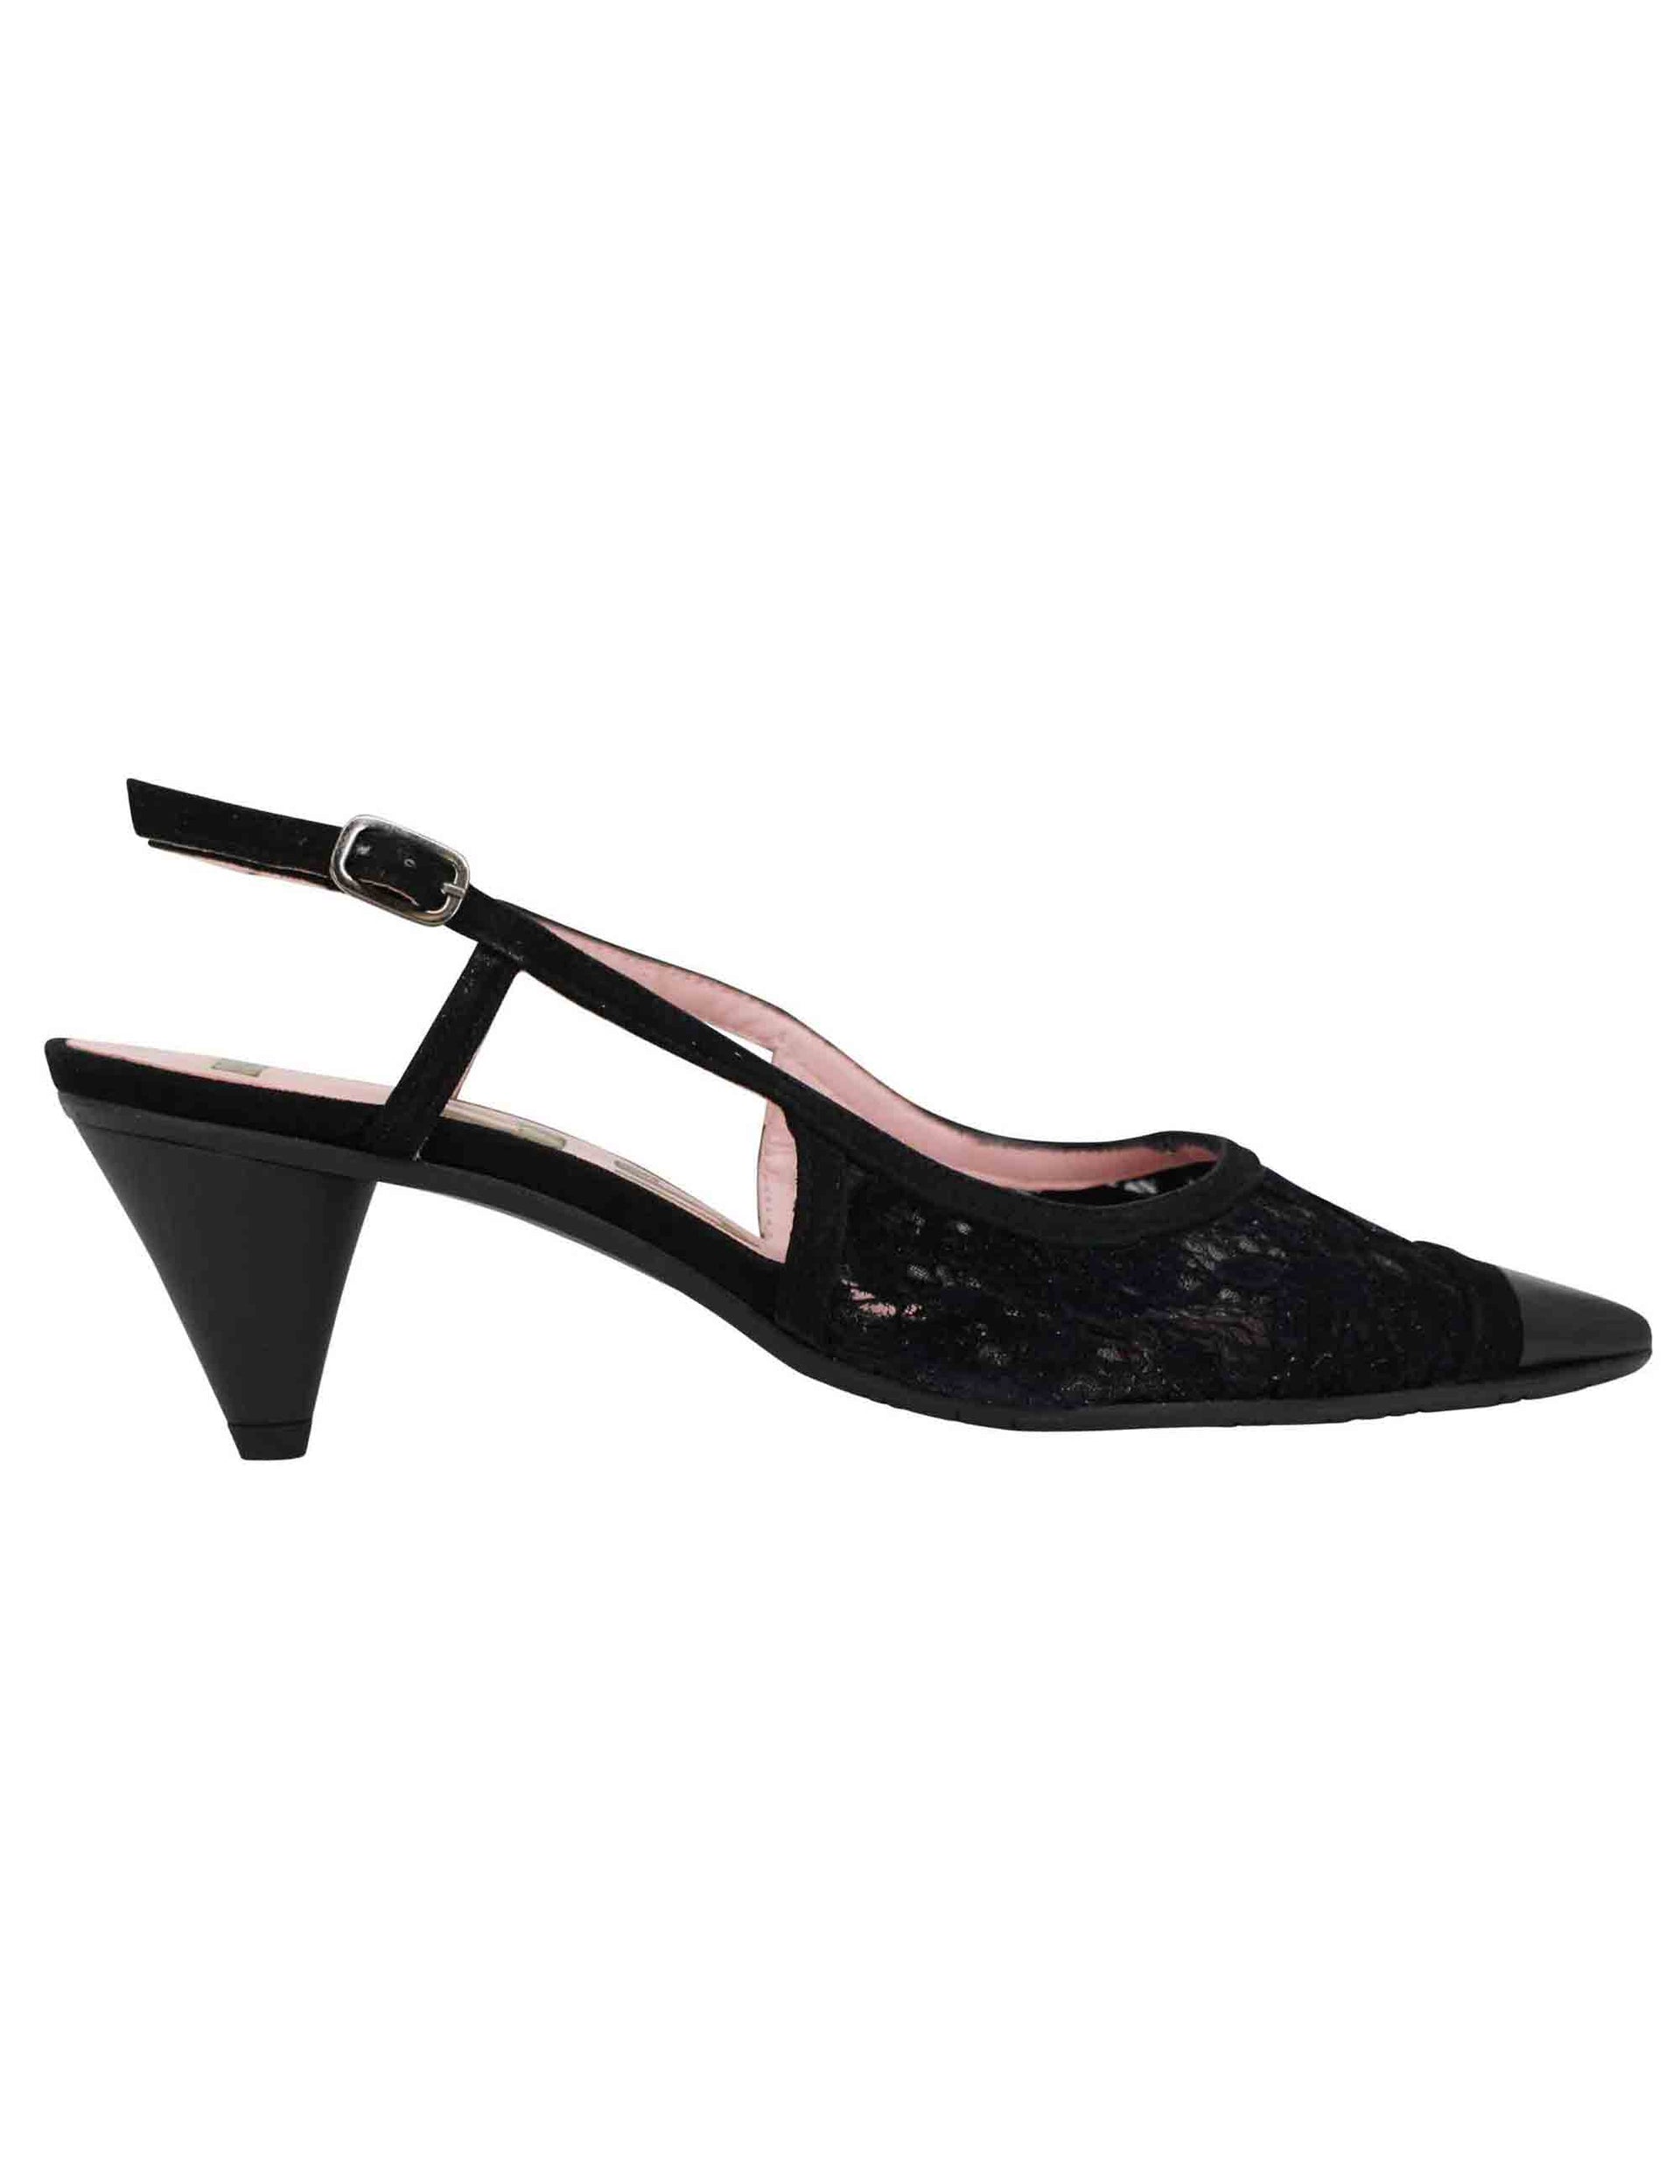 Women's black lace slingback pumps with pointed toe